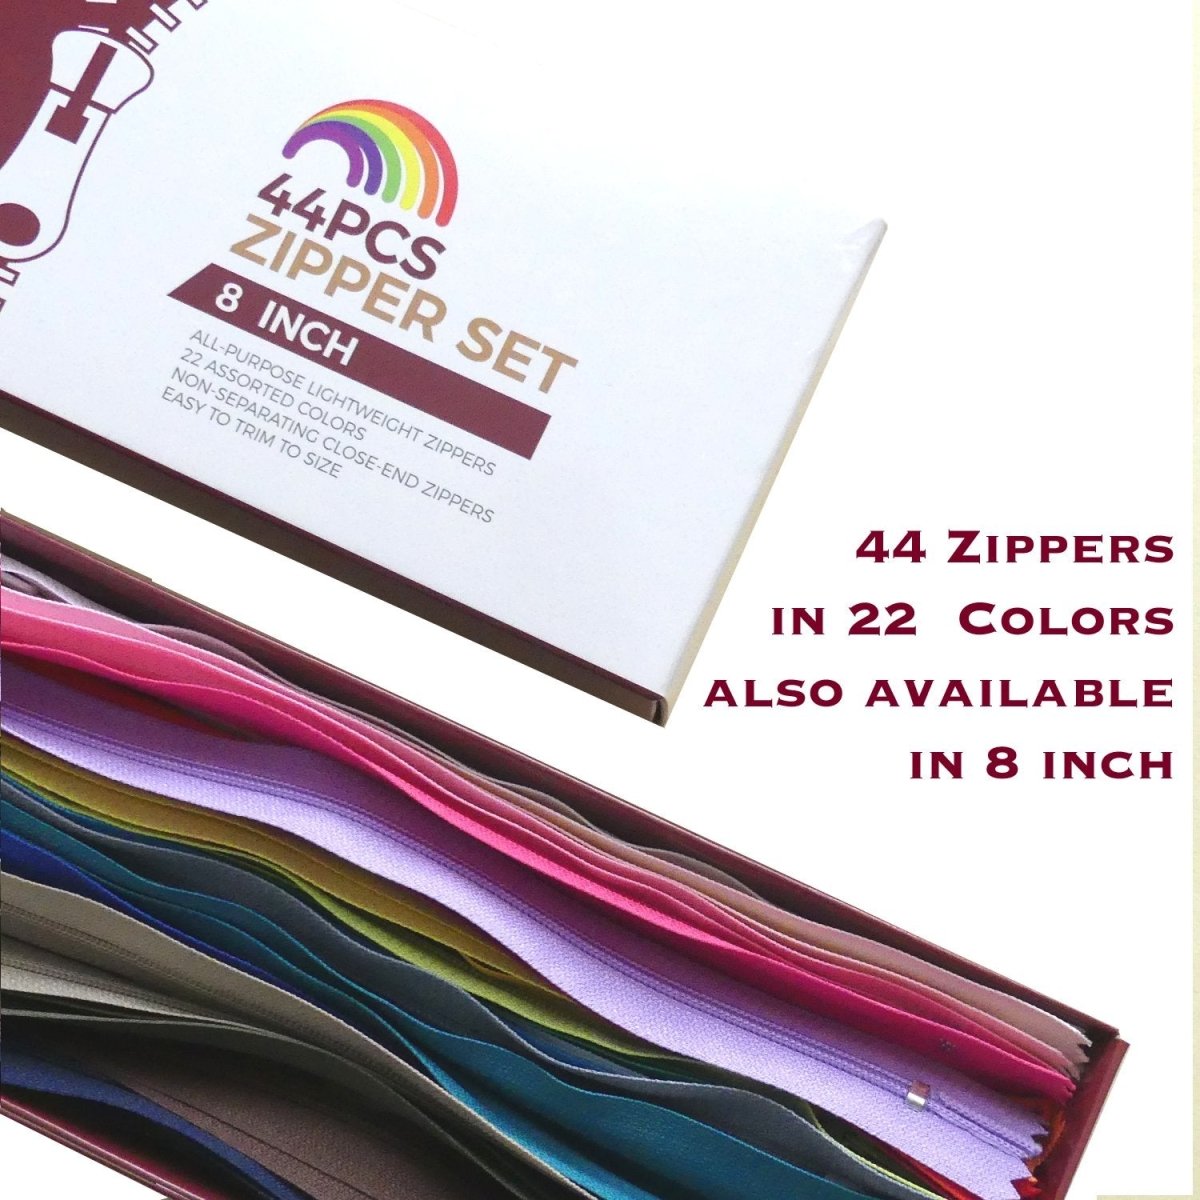 8 inch zippers in a box in 22 colors